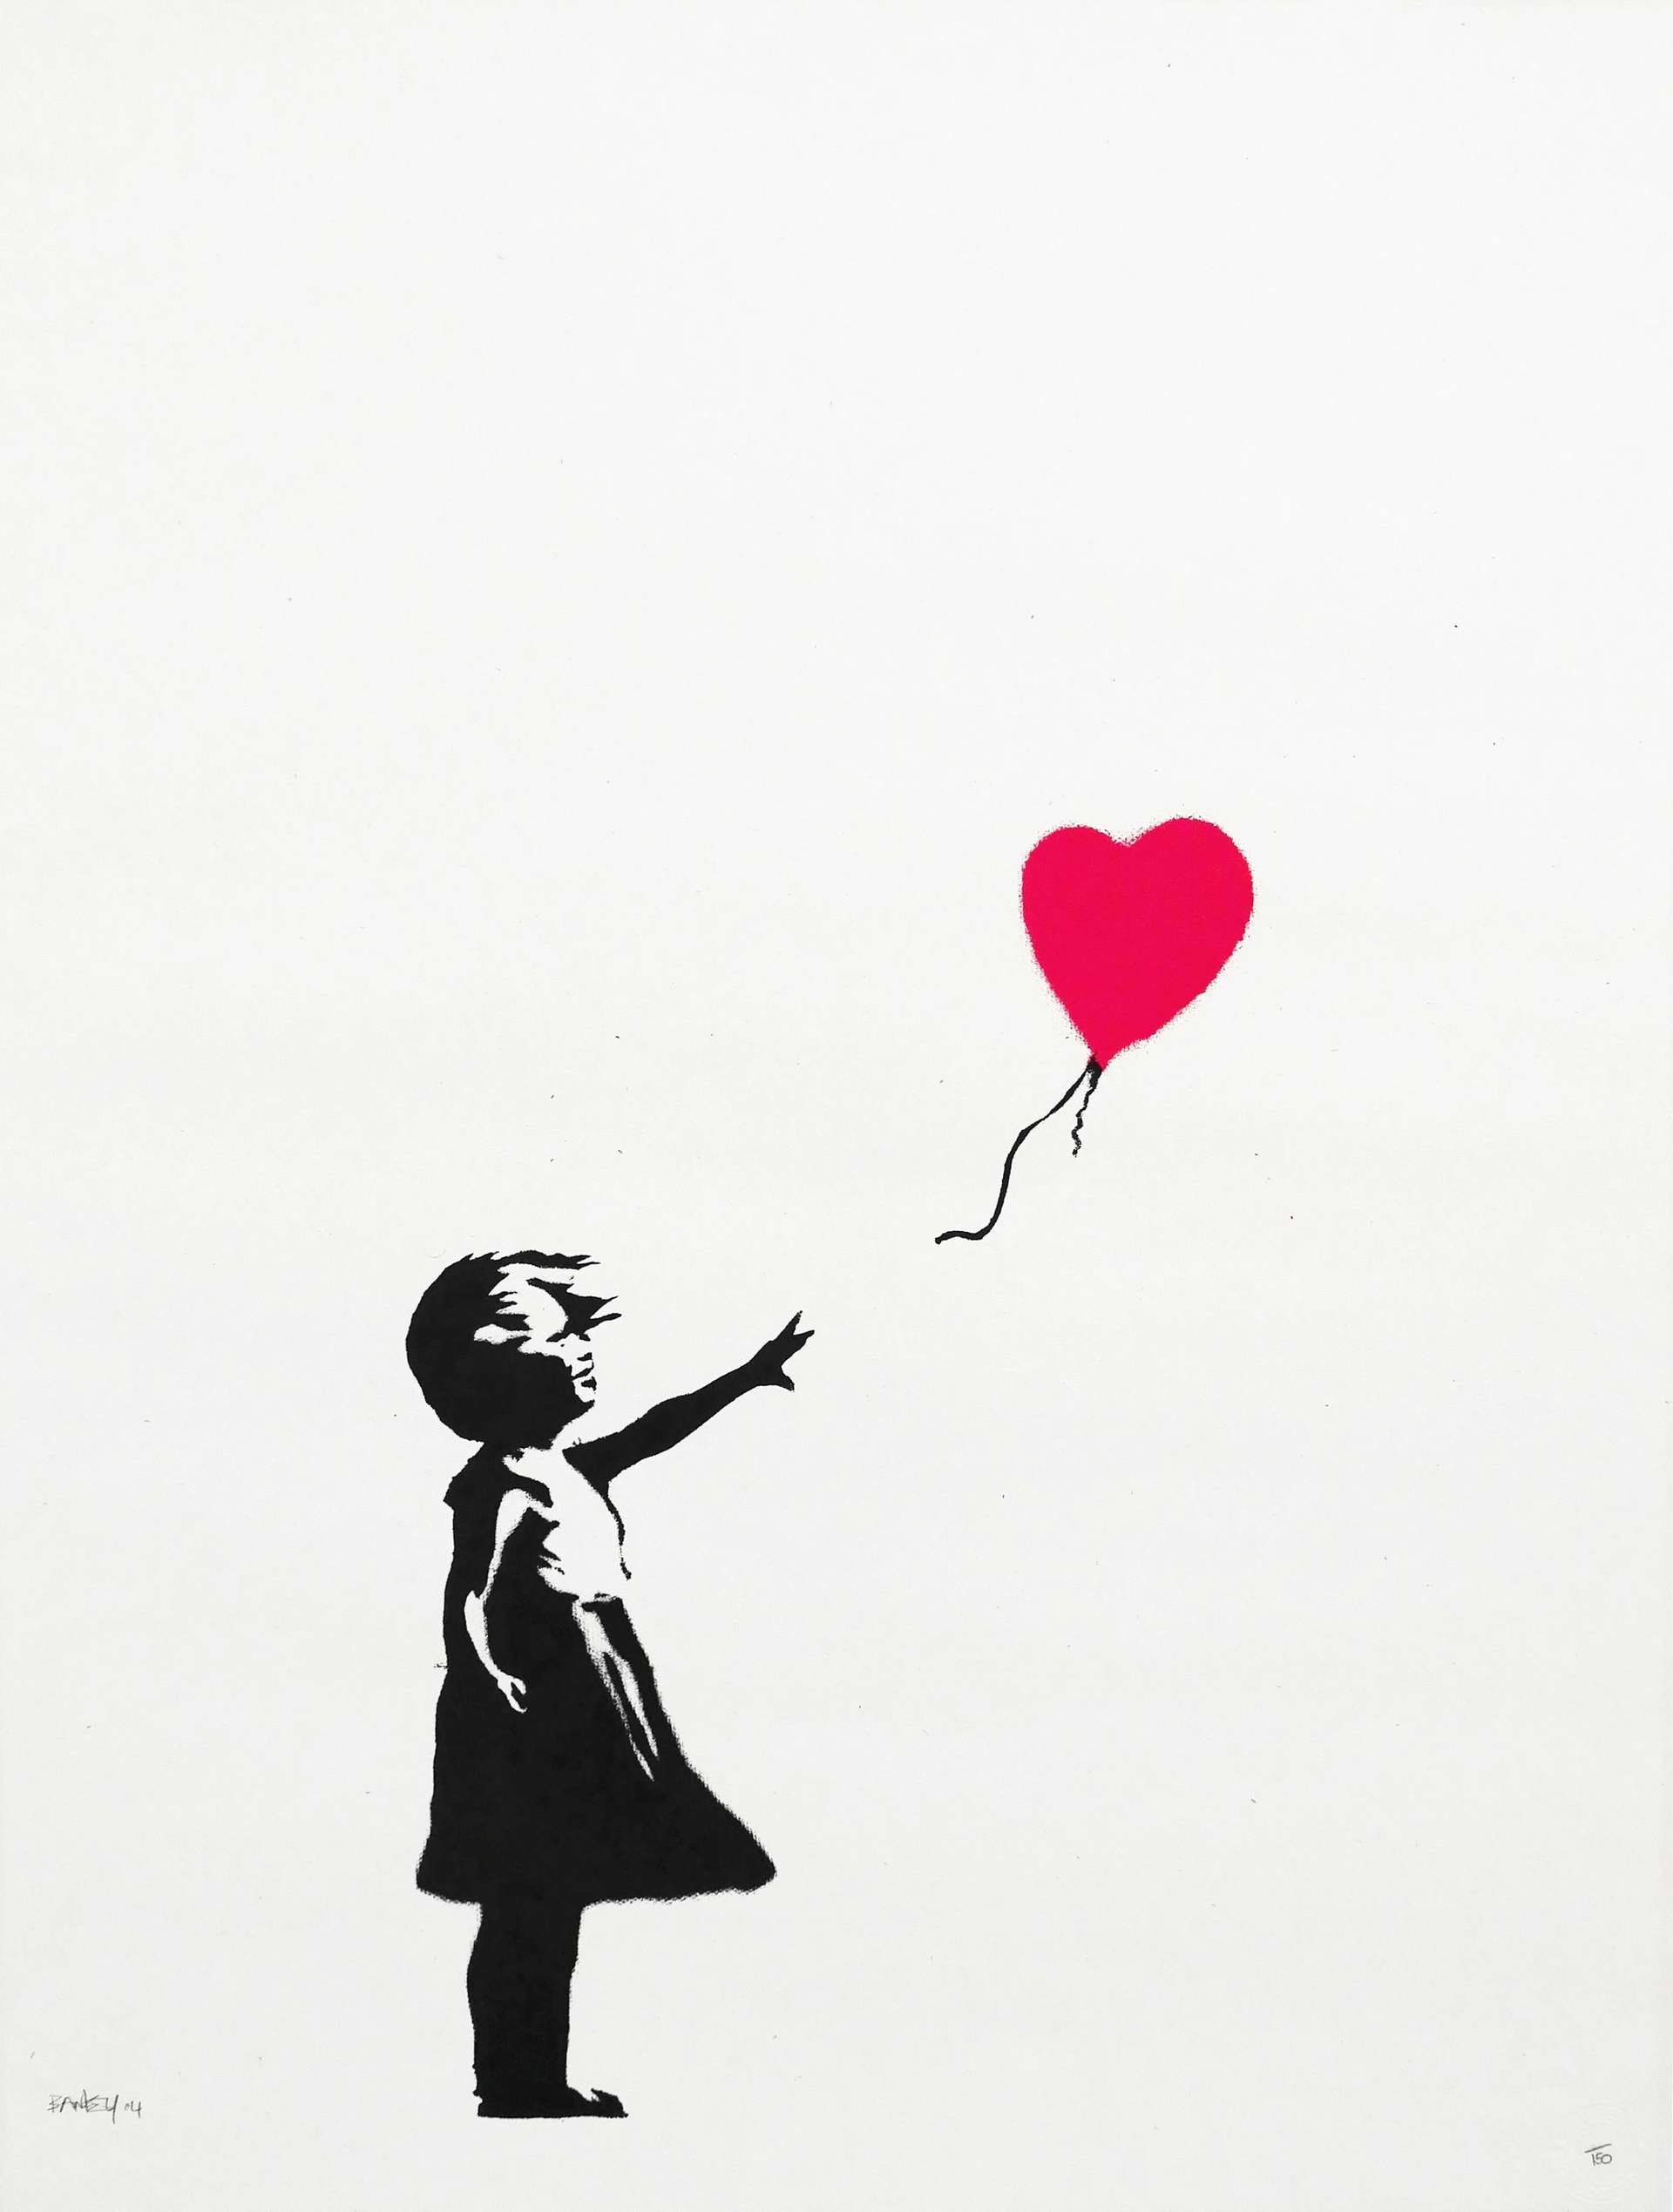 10 Facts About Banksy's Girl with Balloon 